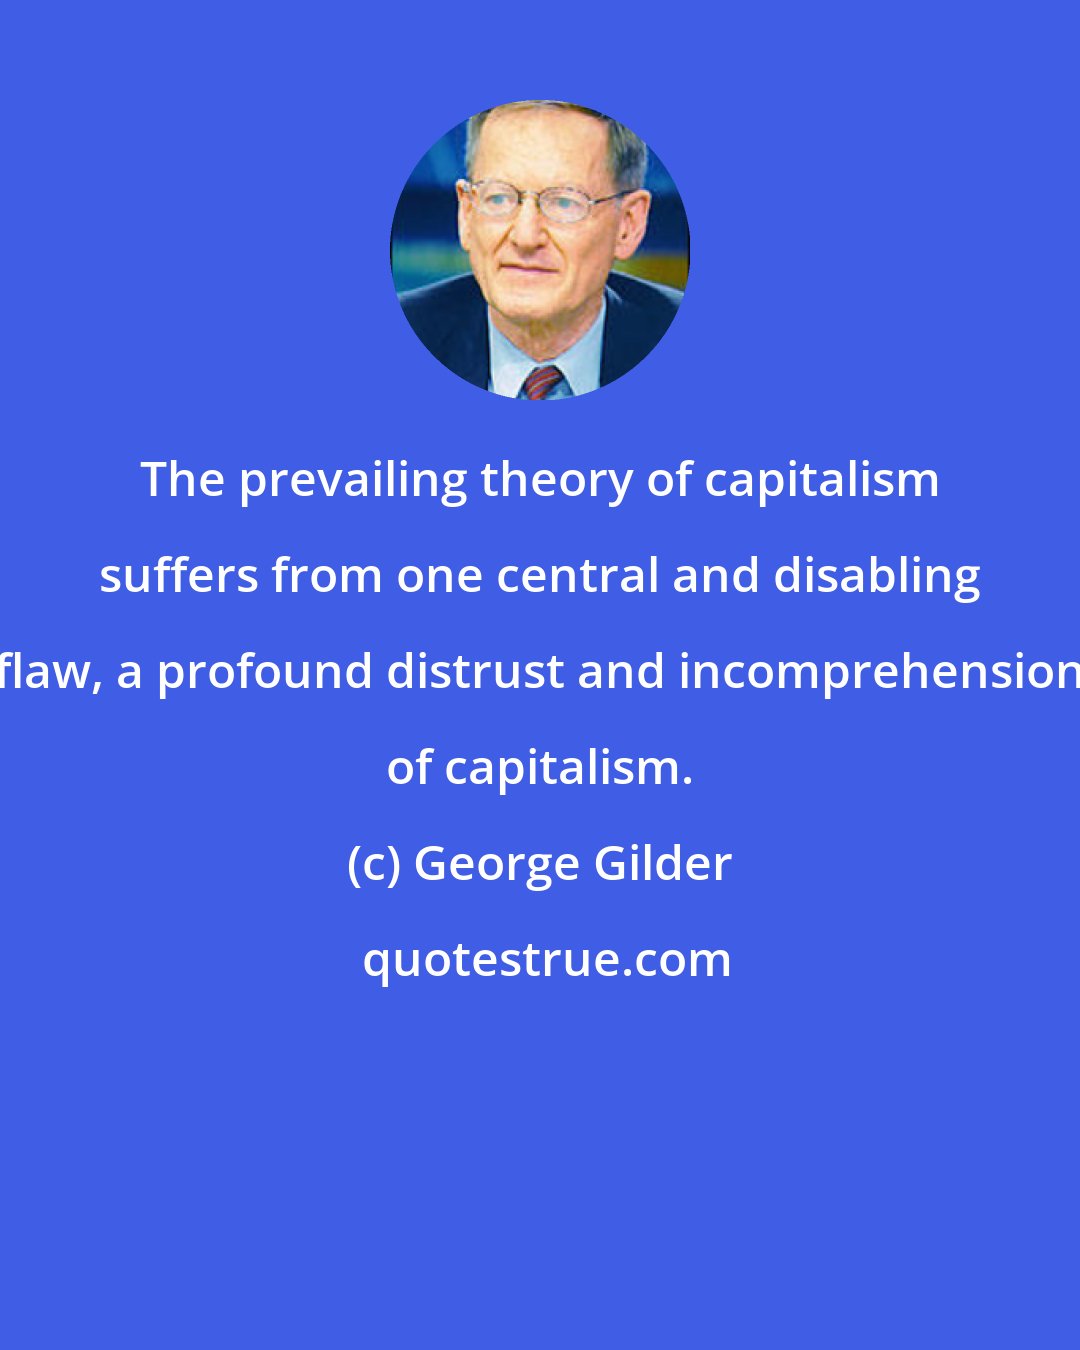 George Gilder: The prevailing theory of capitalism suffers from one central and disabling flaw, a profound distrust and incomprehension of capitalism.